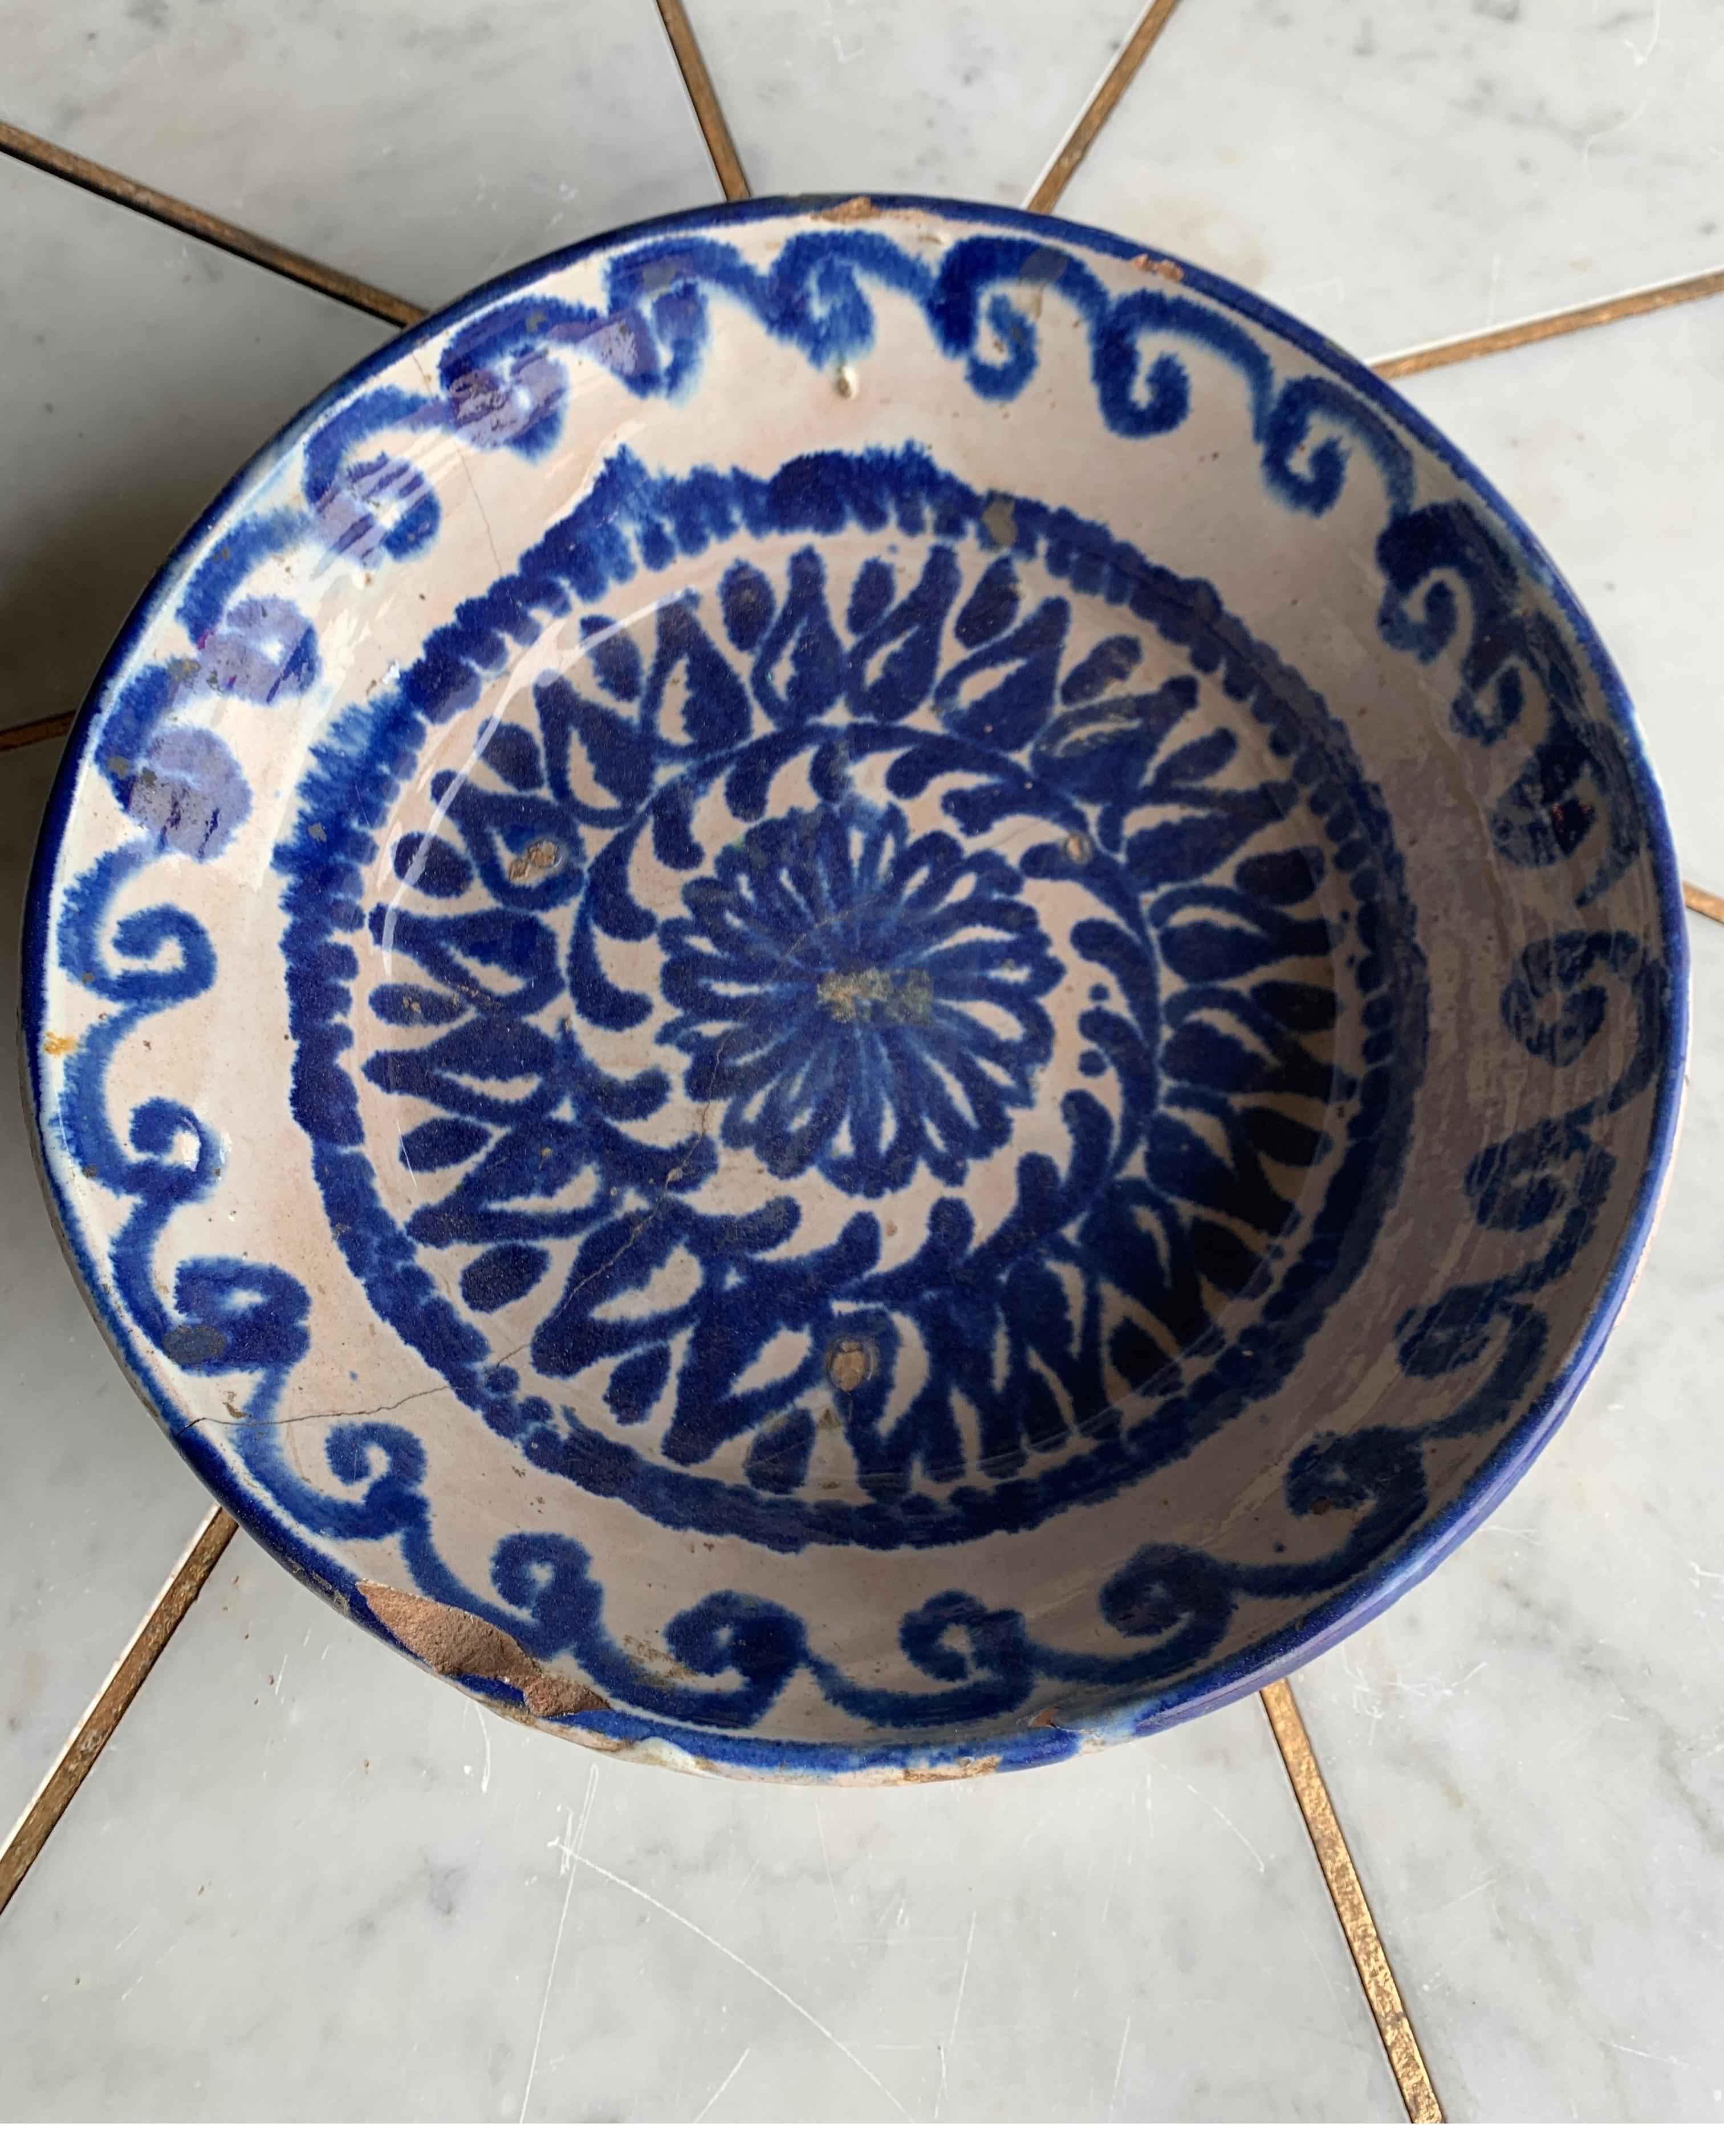 Fired 19th Century Spanish Blue and White Pattern Bowl with Original Staples